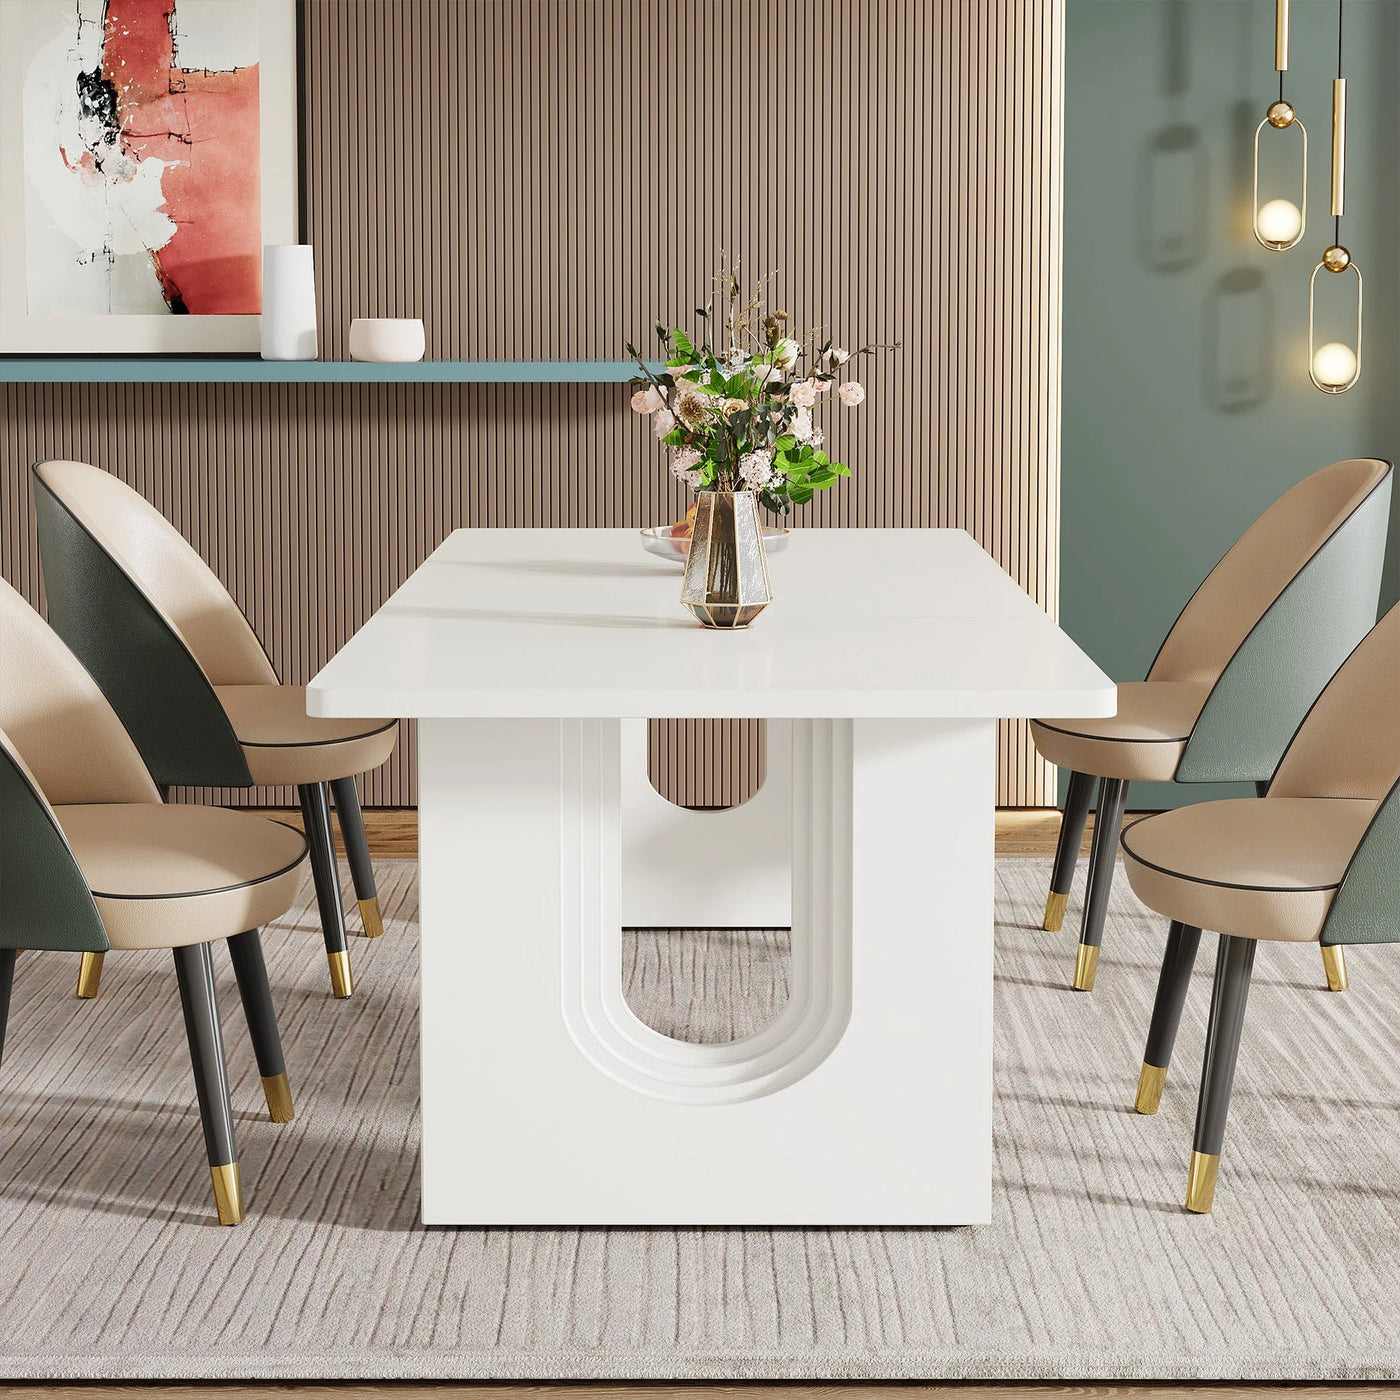 Laront 71" Dining Table for 6 to 8 People | Modern White Wood Kitchen Dinner Table